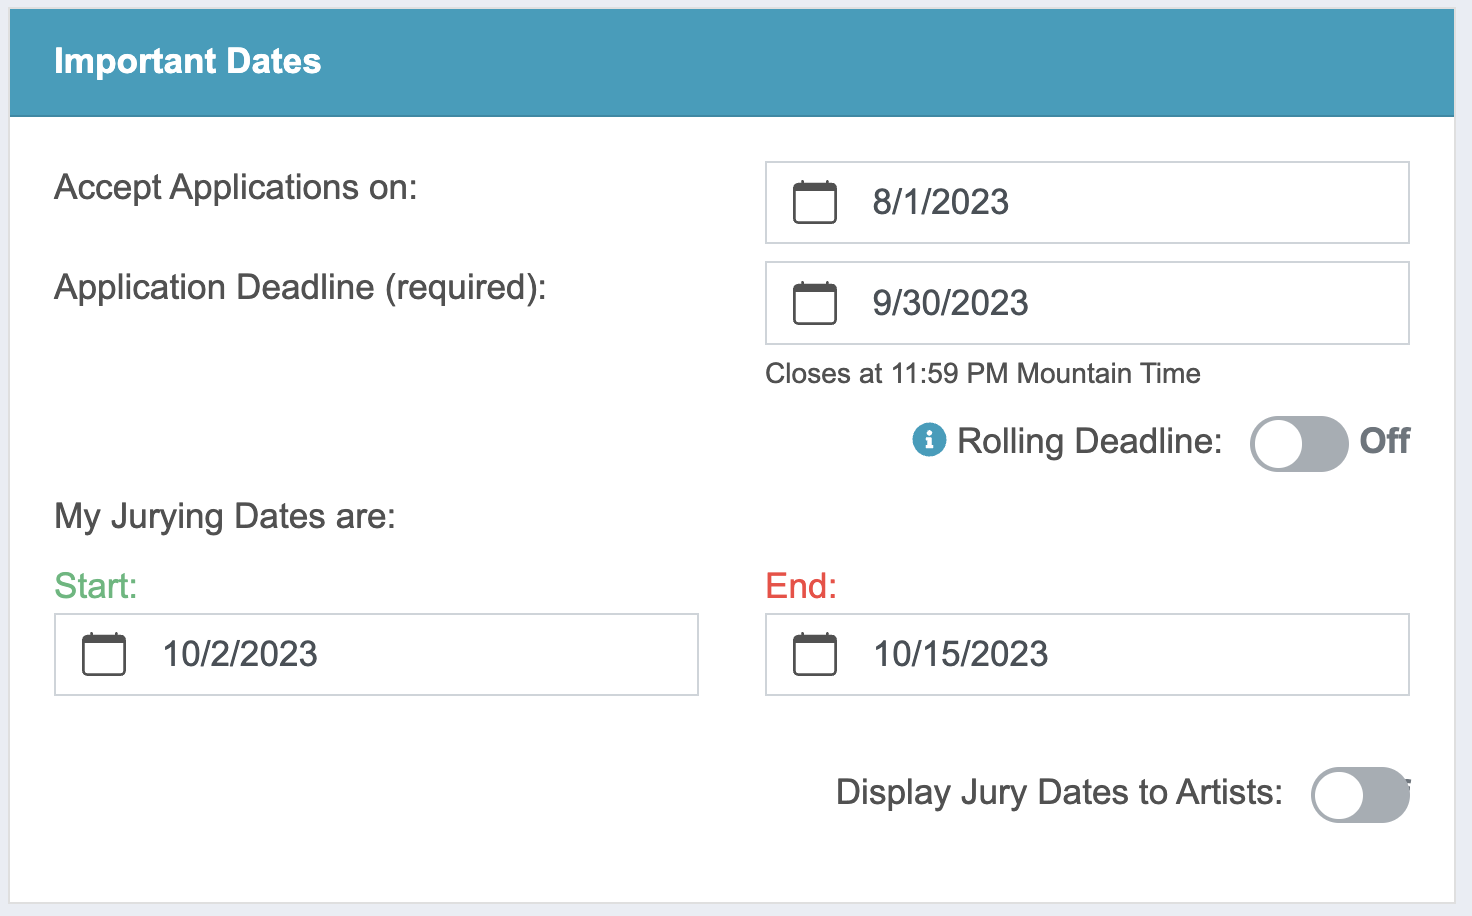 Screenshot of the important dates section where admins can set their app deadline and jury dates